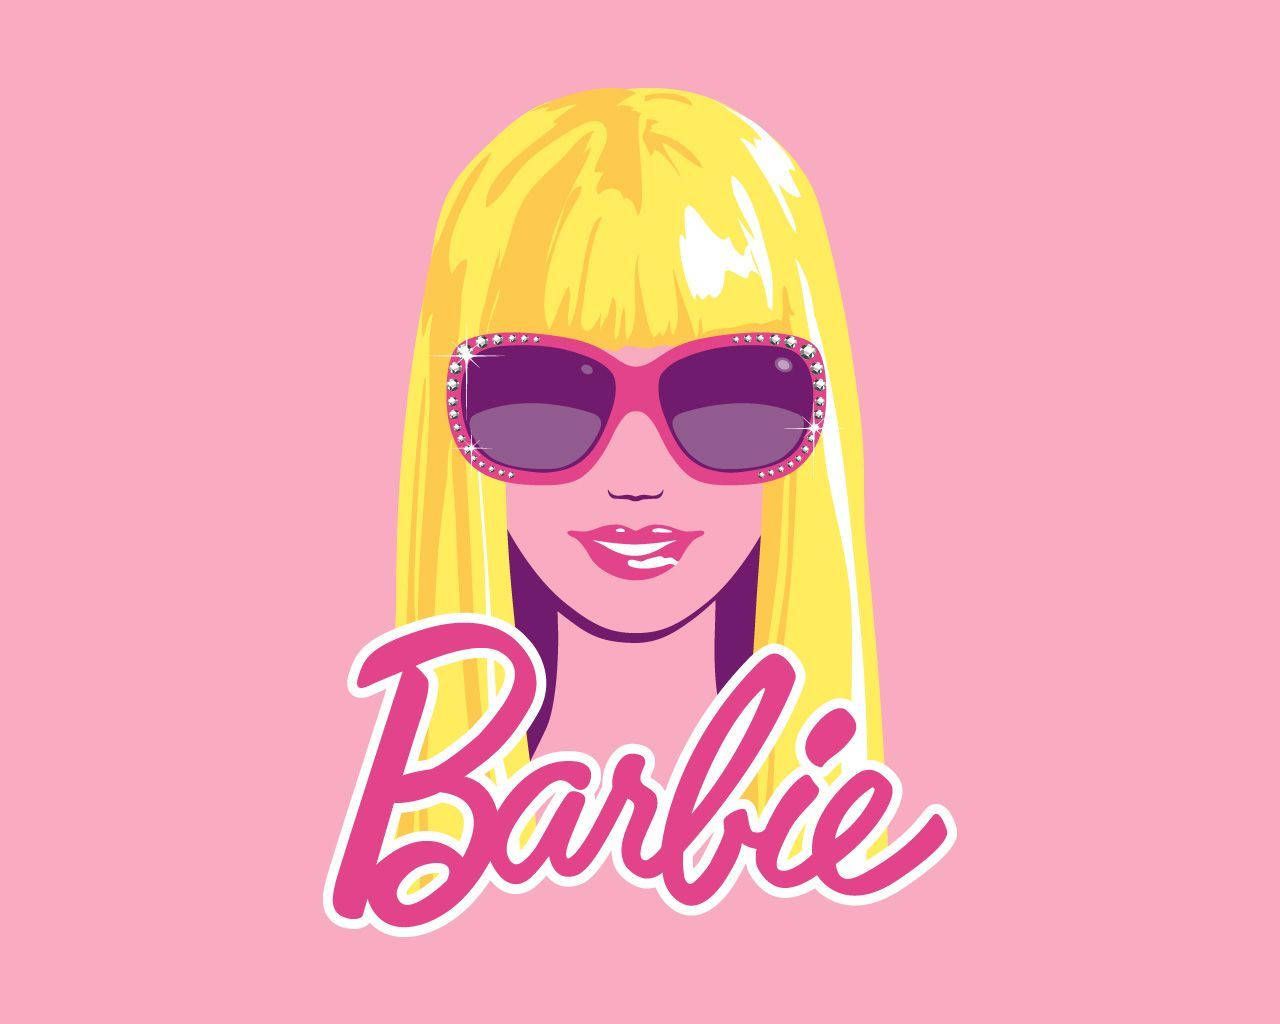 A portrait of Barbie in pink sunglasses on a pink background - Barbie